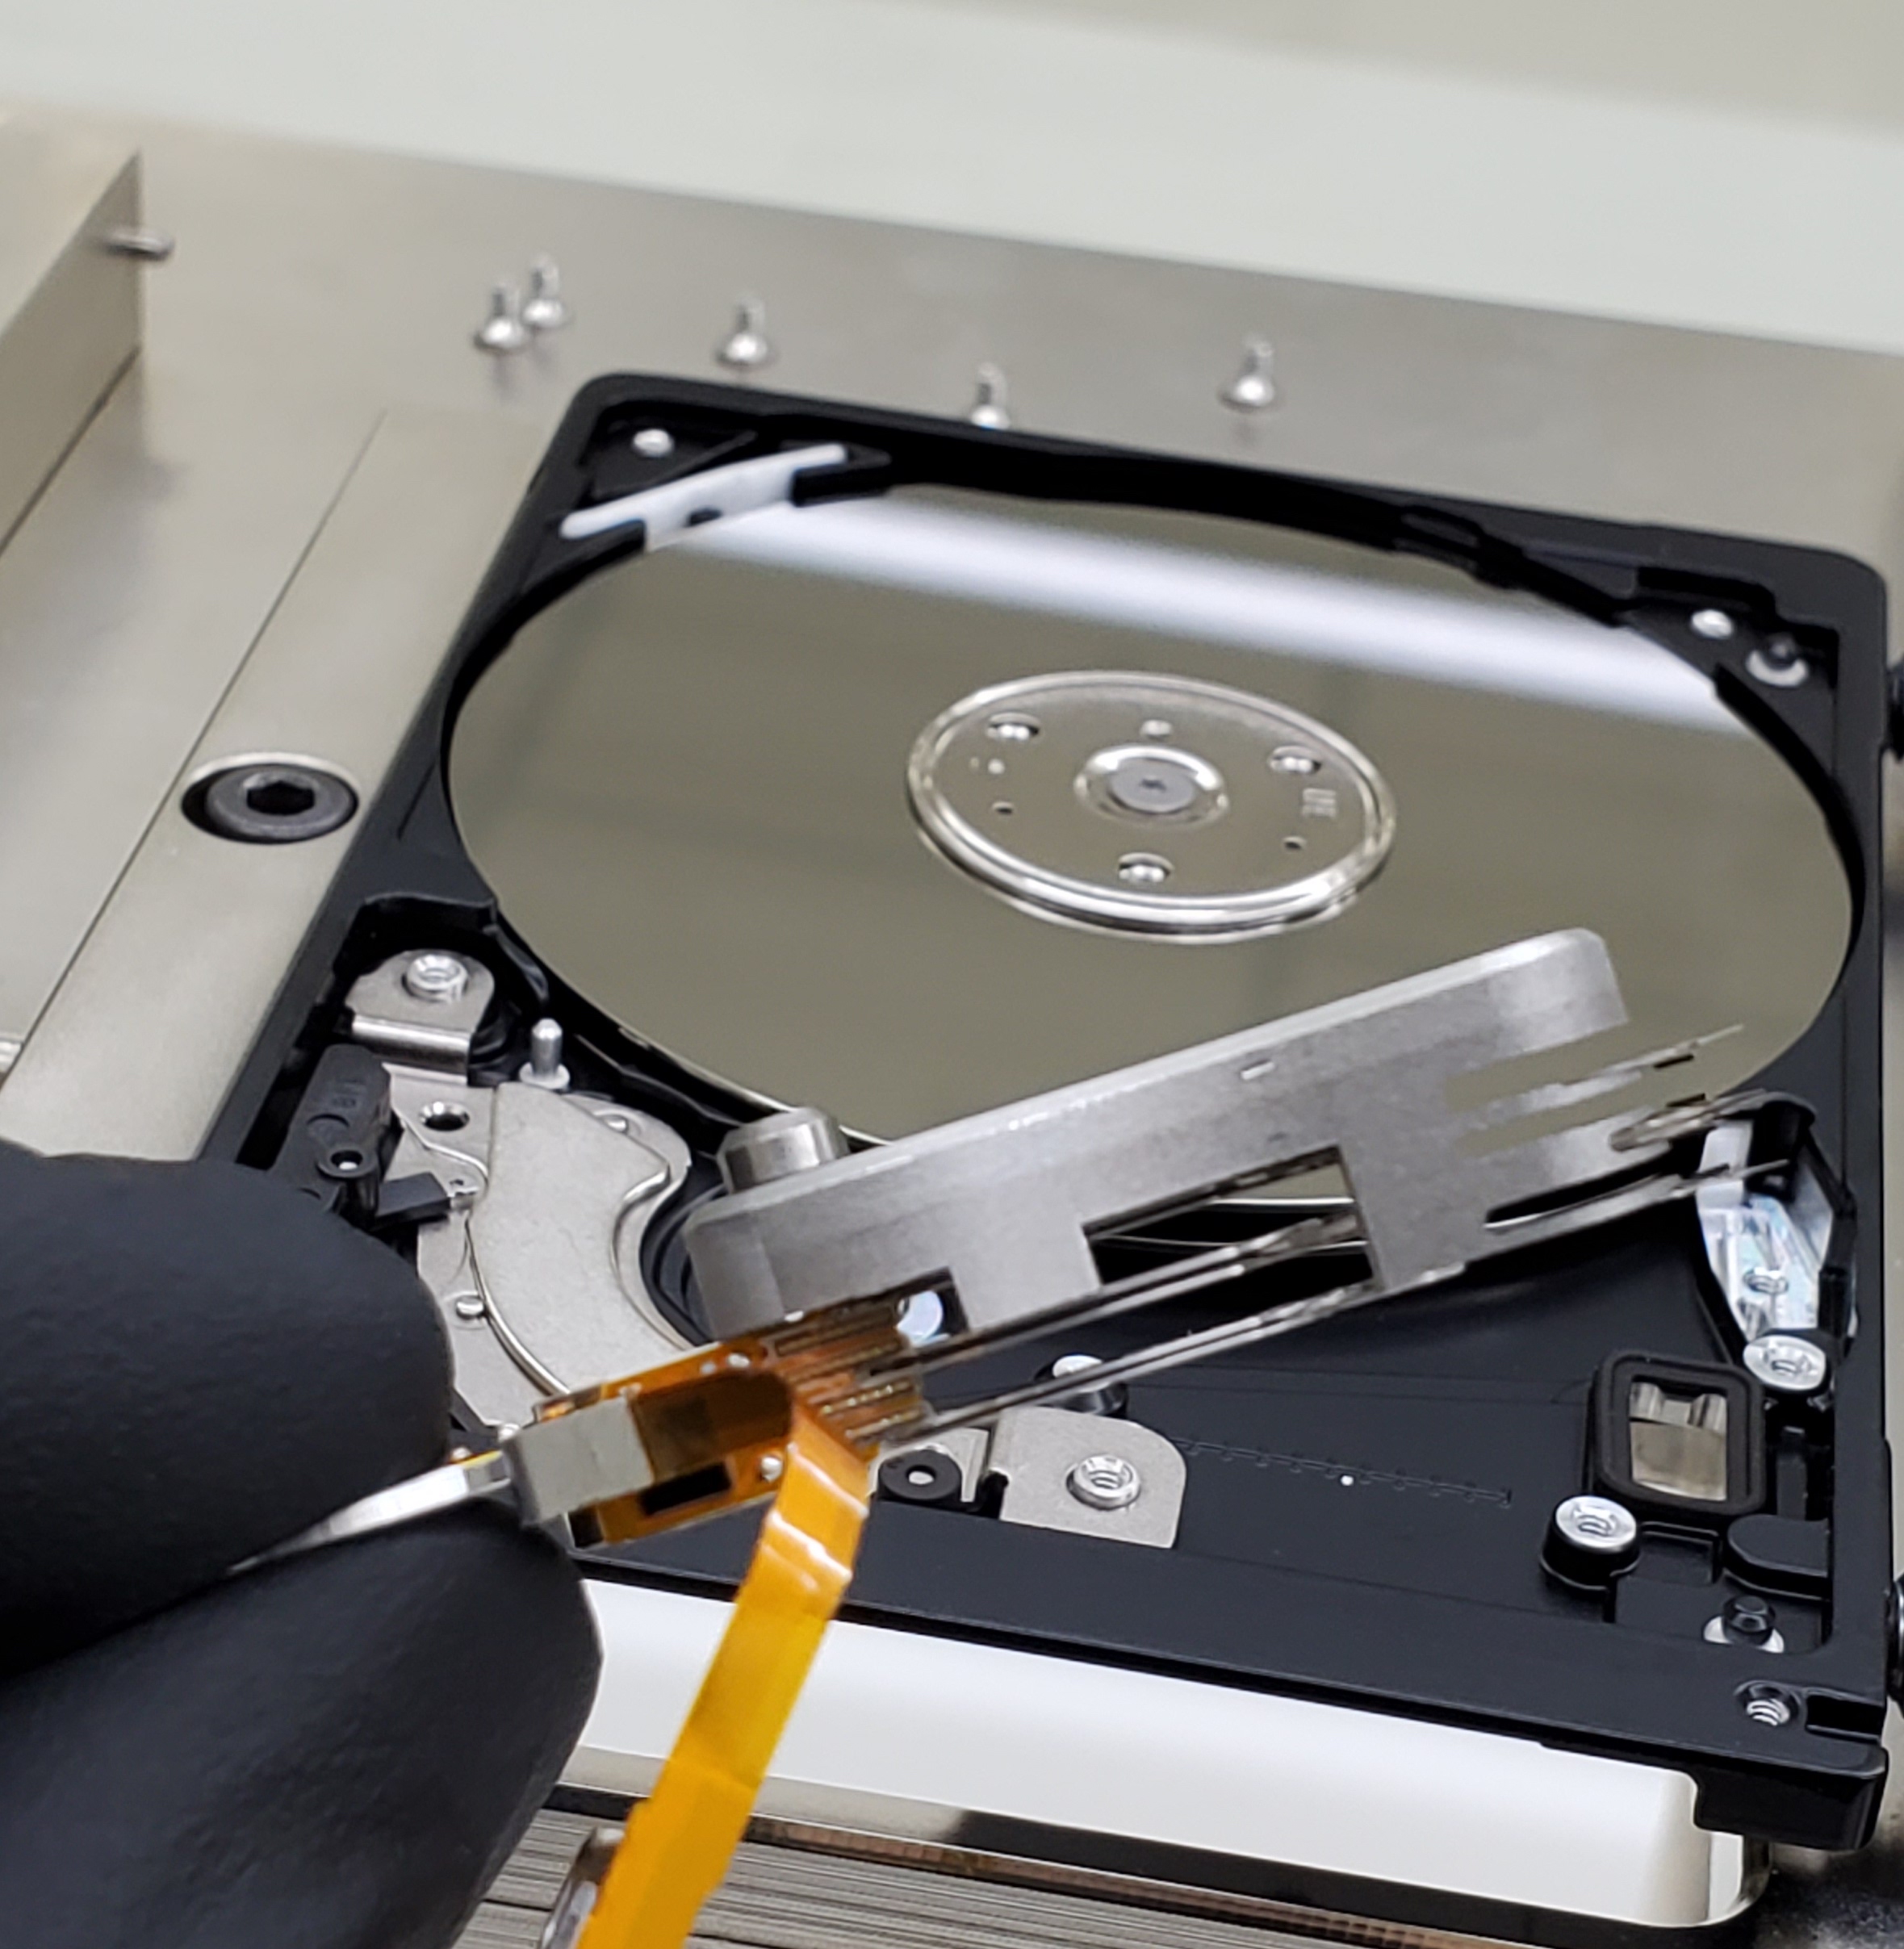 external hard drive data recovery cost